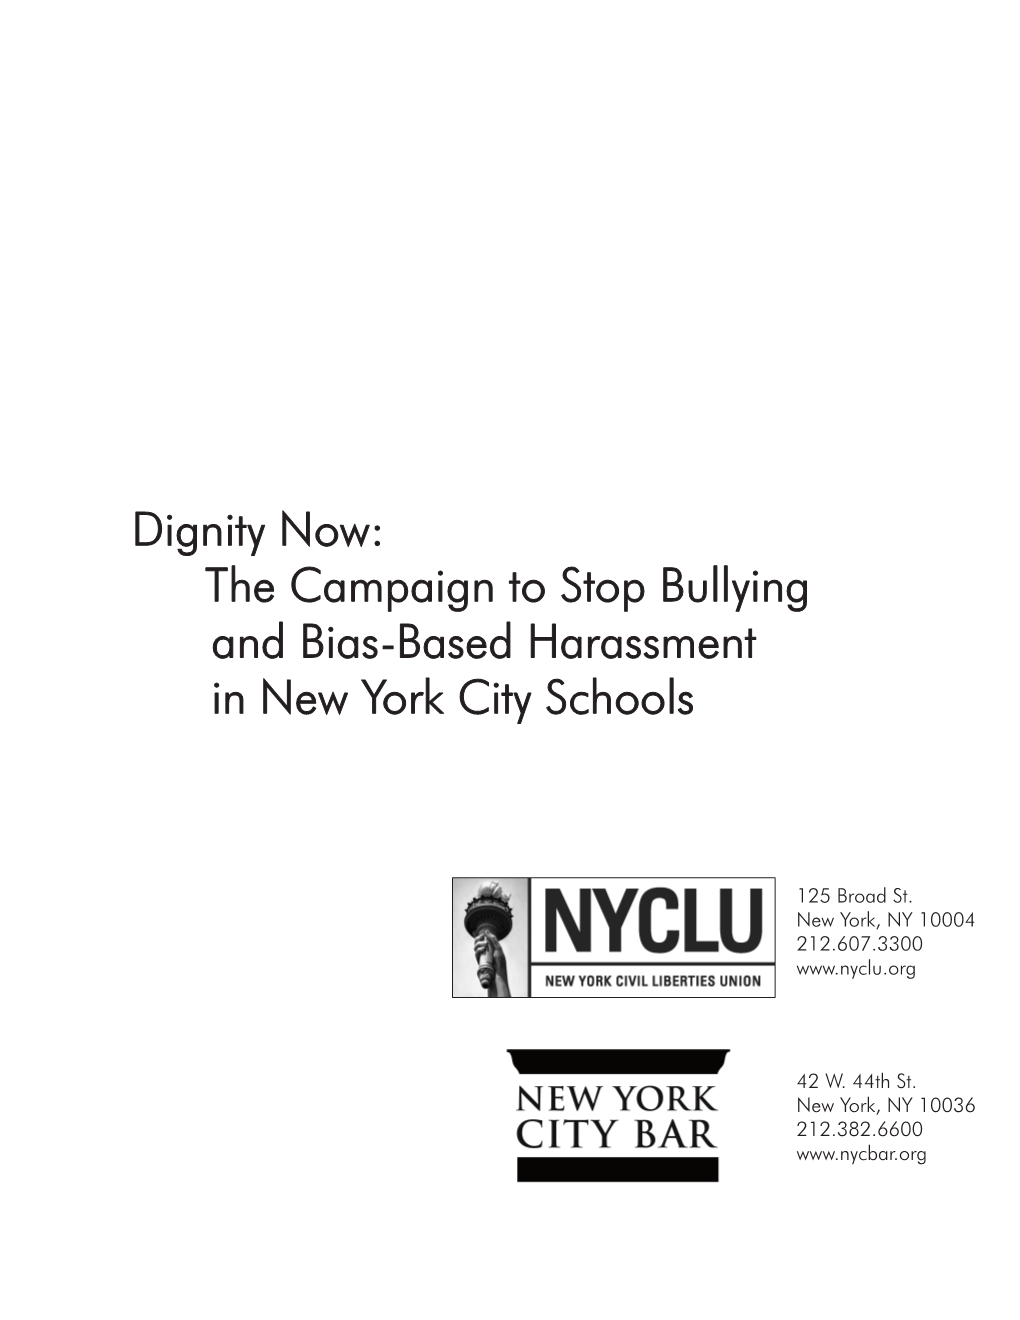 Dignity Now: the Campaign to Stop Bullying and Bias-Based Harassment in New York City Schools